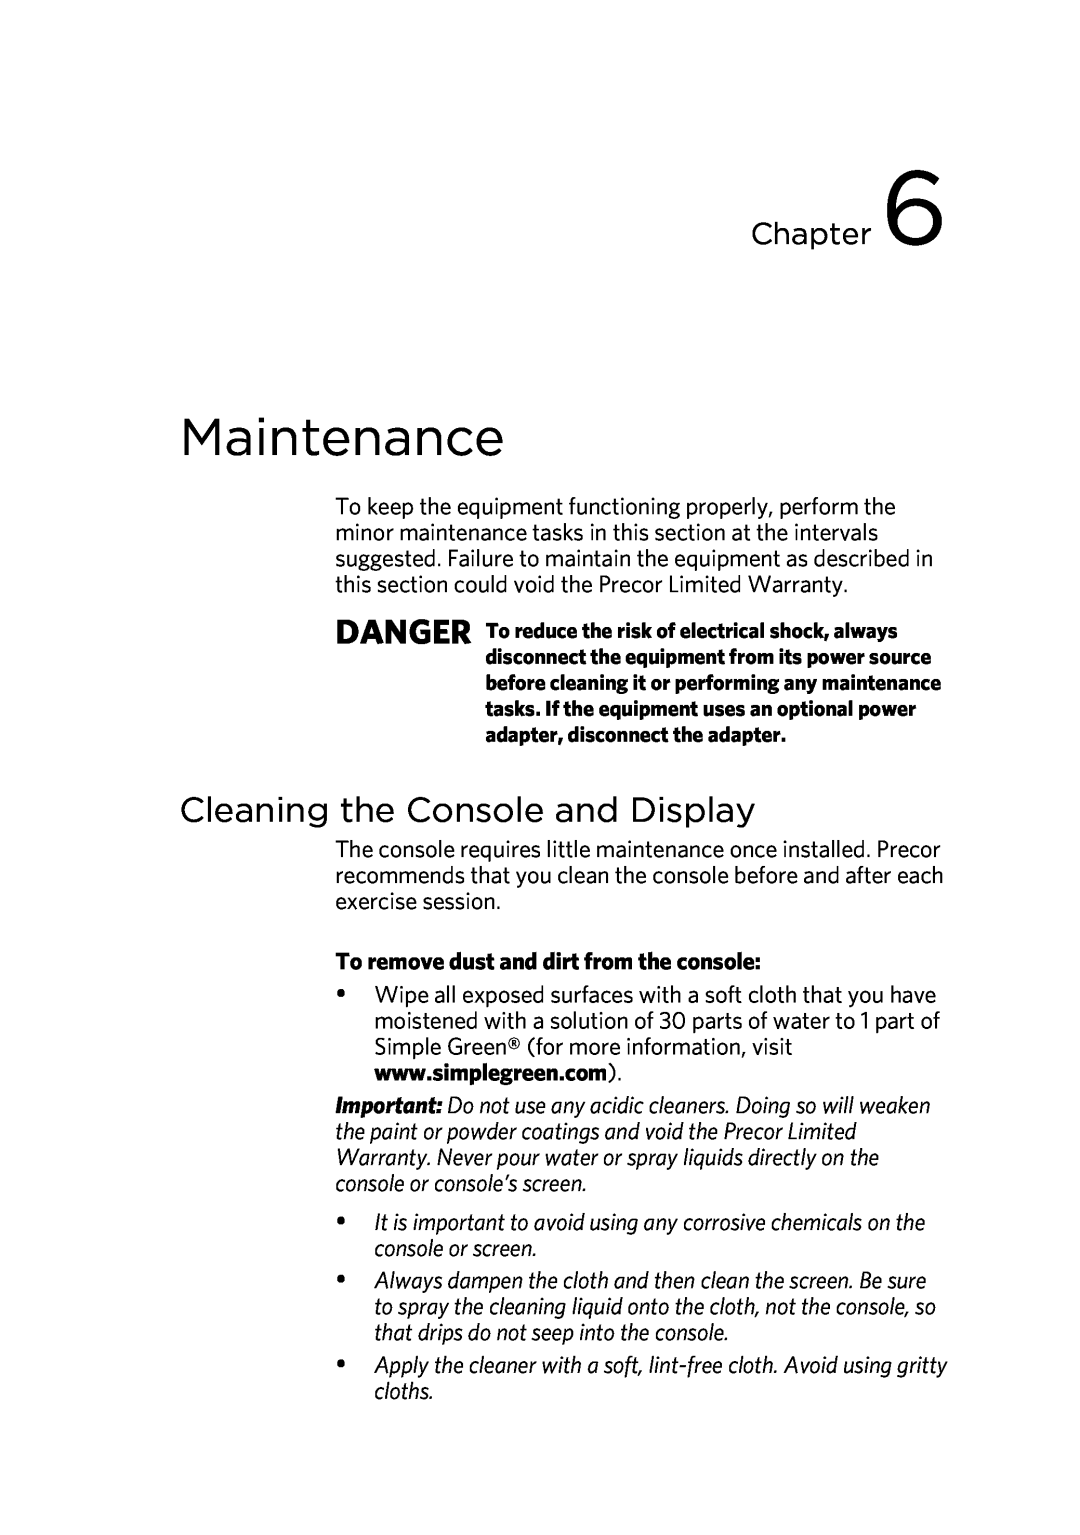 Precor 300753-201 manual Maintenance, Cleaning the Console and Display, To remove dust and dirt from the console, Chapter 